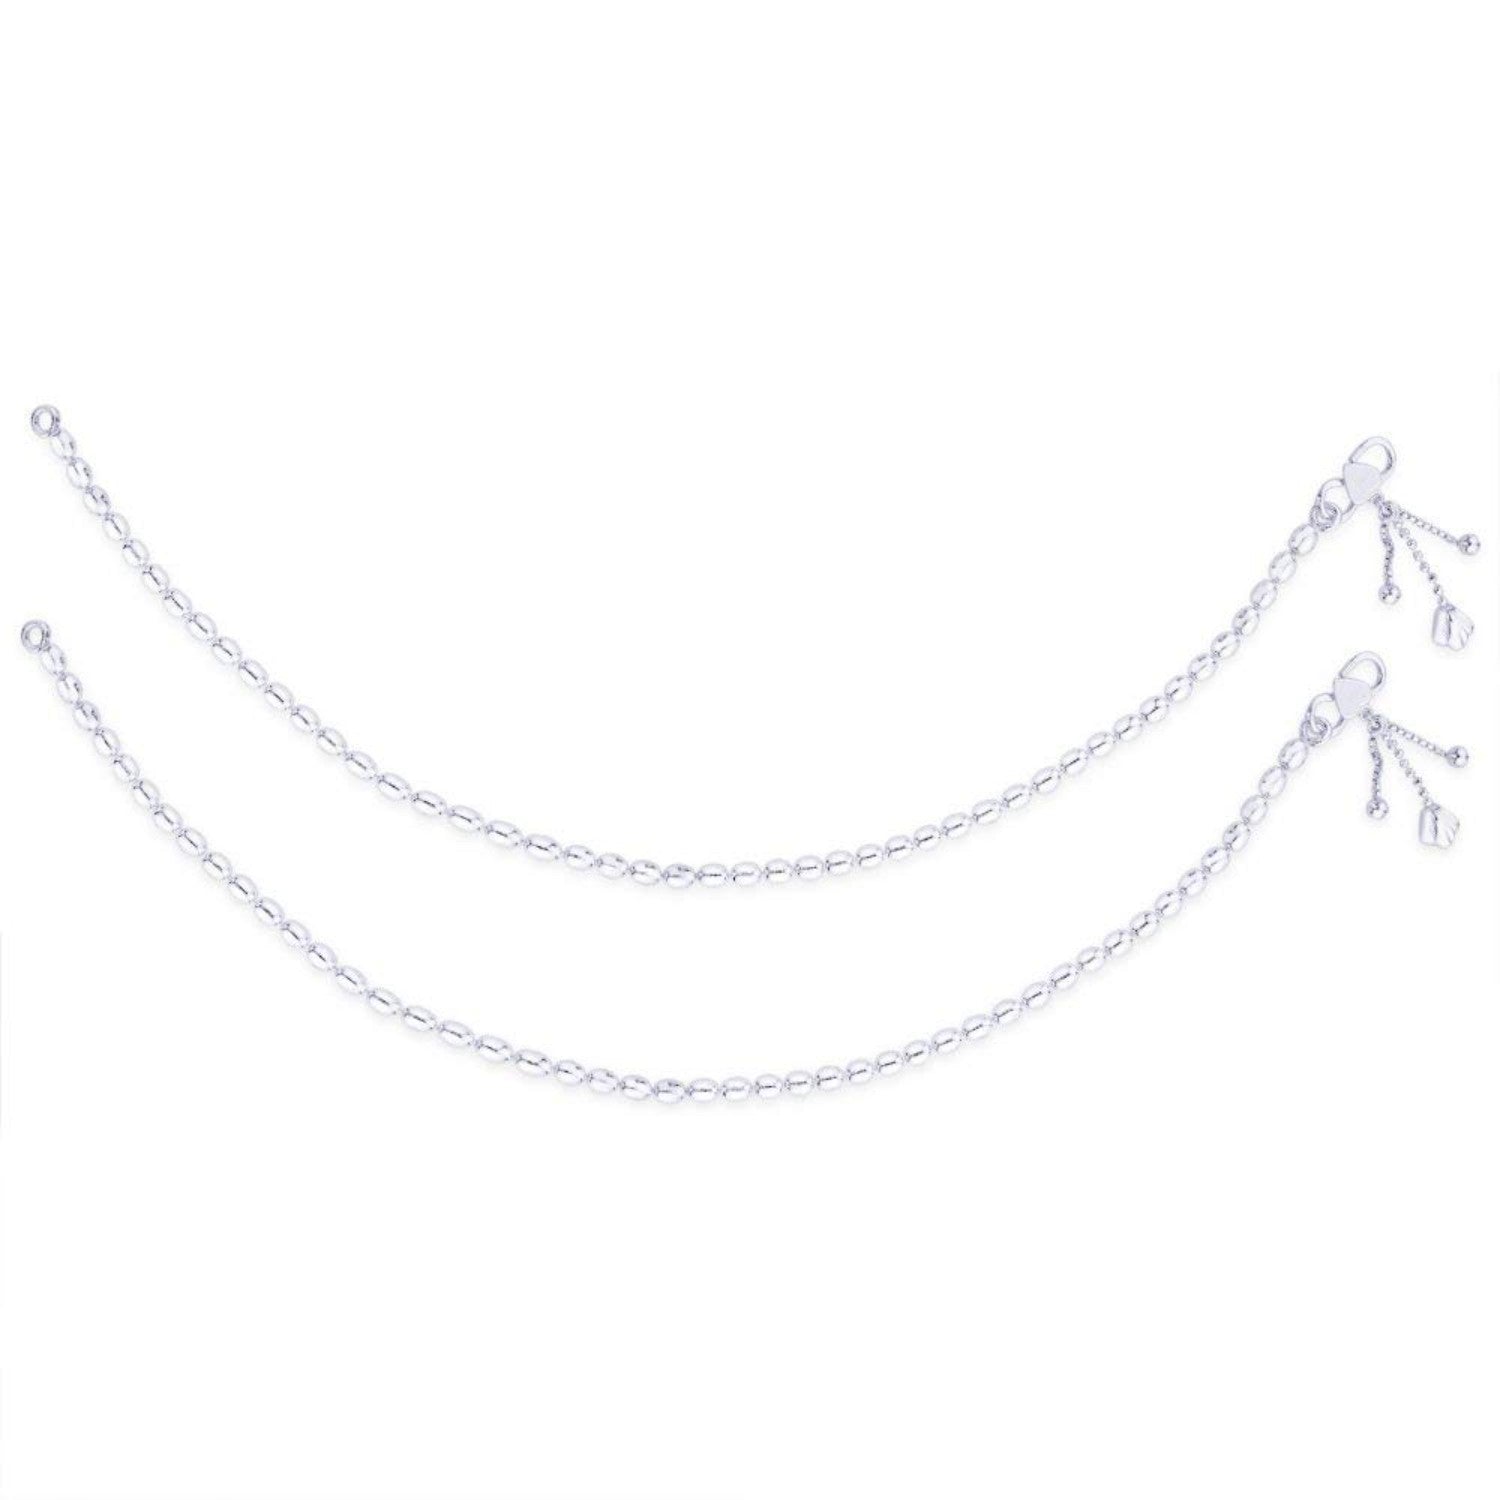 925 Sterling Silver Flower Charm Chain Anklet for Women